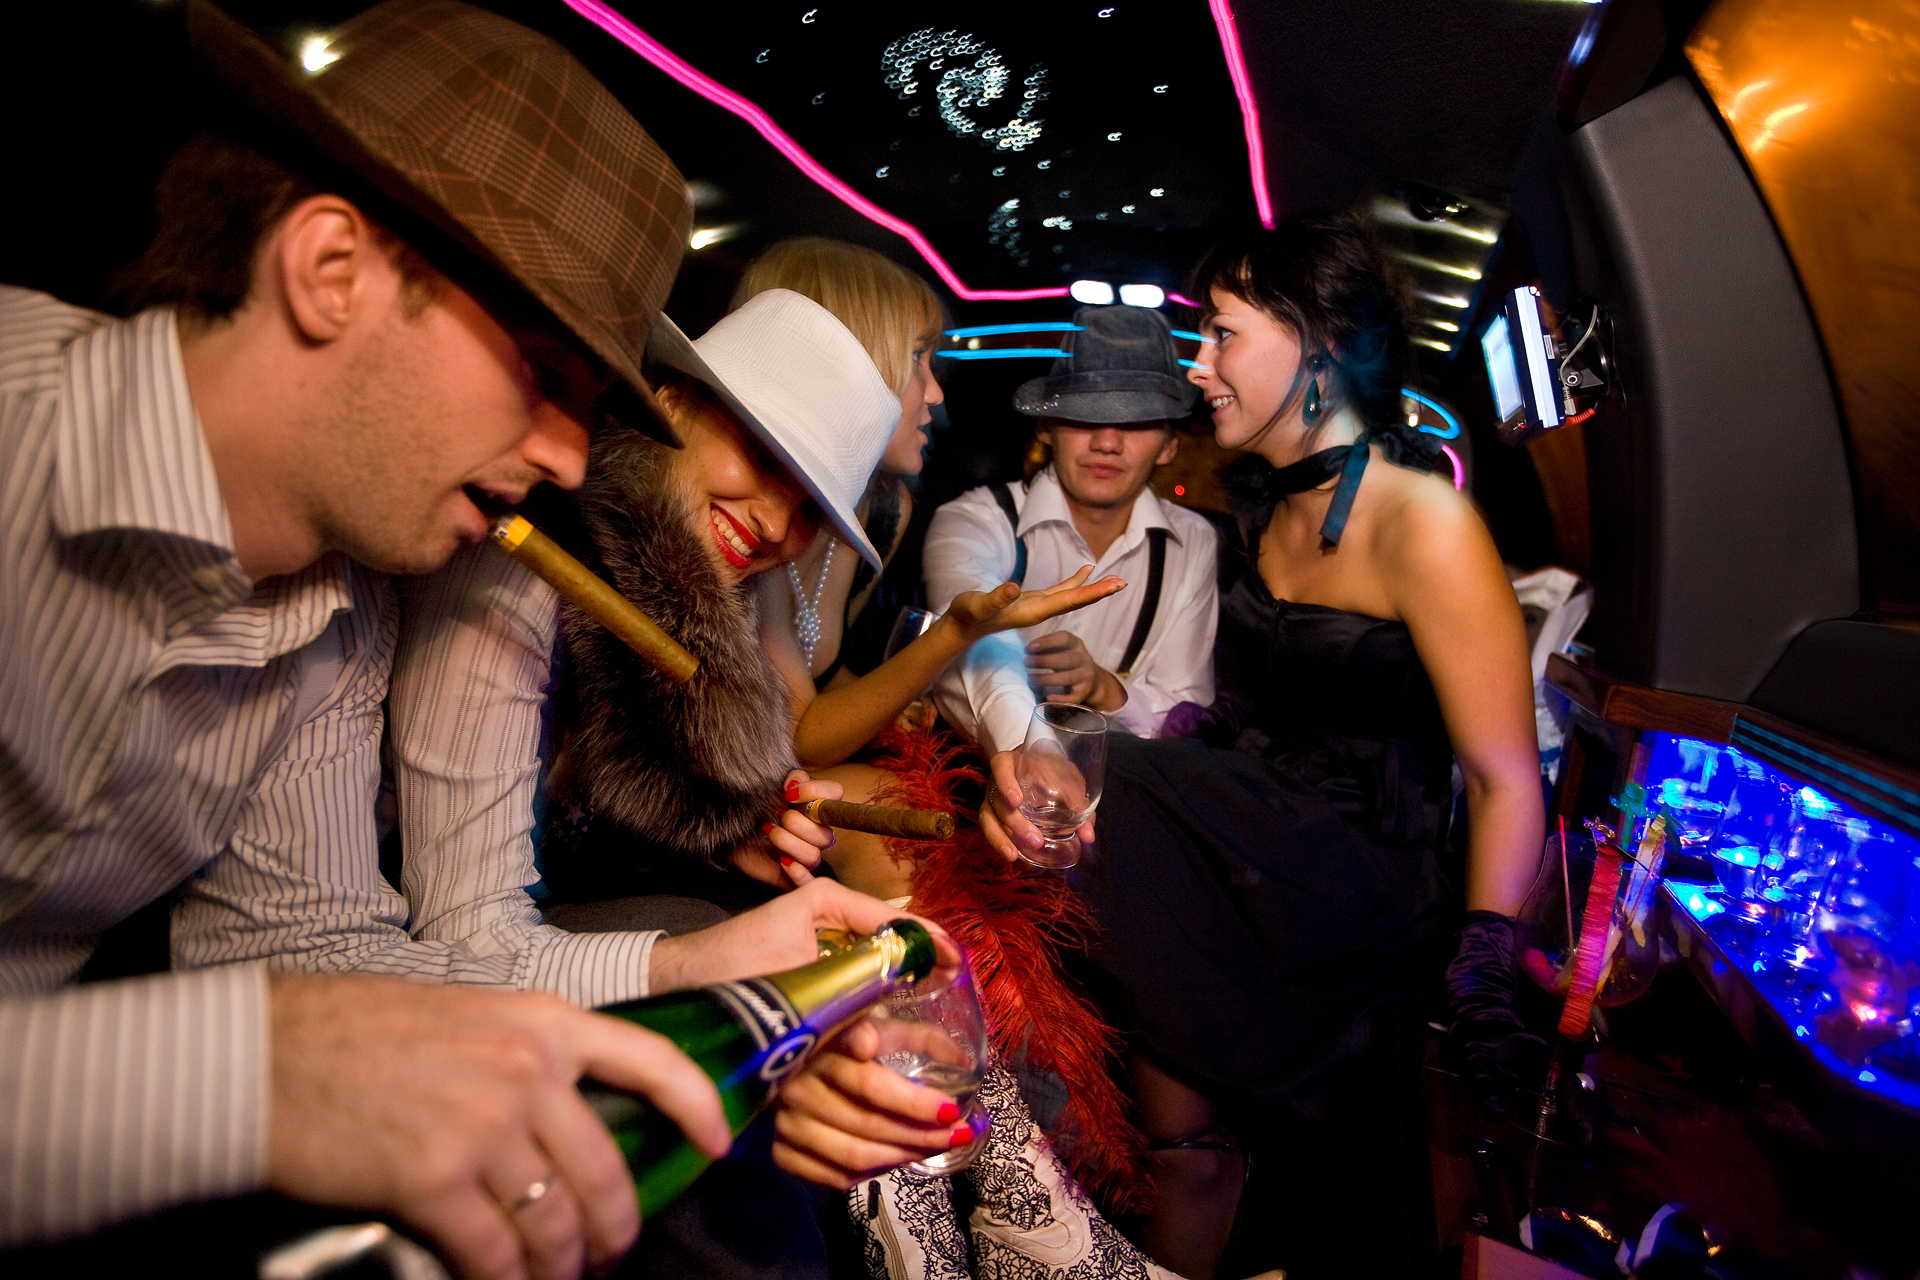  12:05AM - Members of Russia's new elite shop till they drop and party till dawn. This group of financial advisors has rented a white stretch limo to drink champagne and cruise the city. 